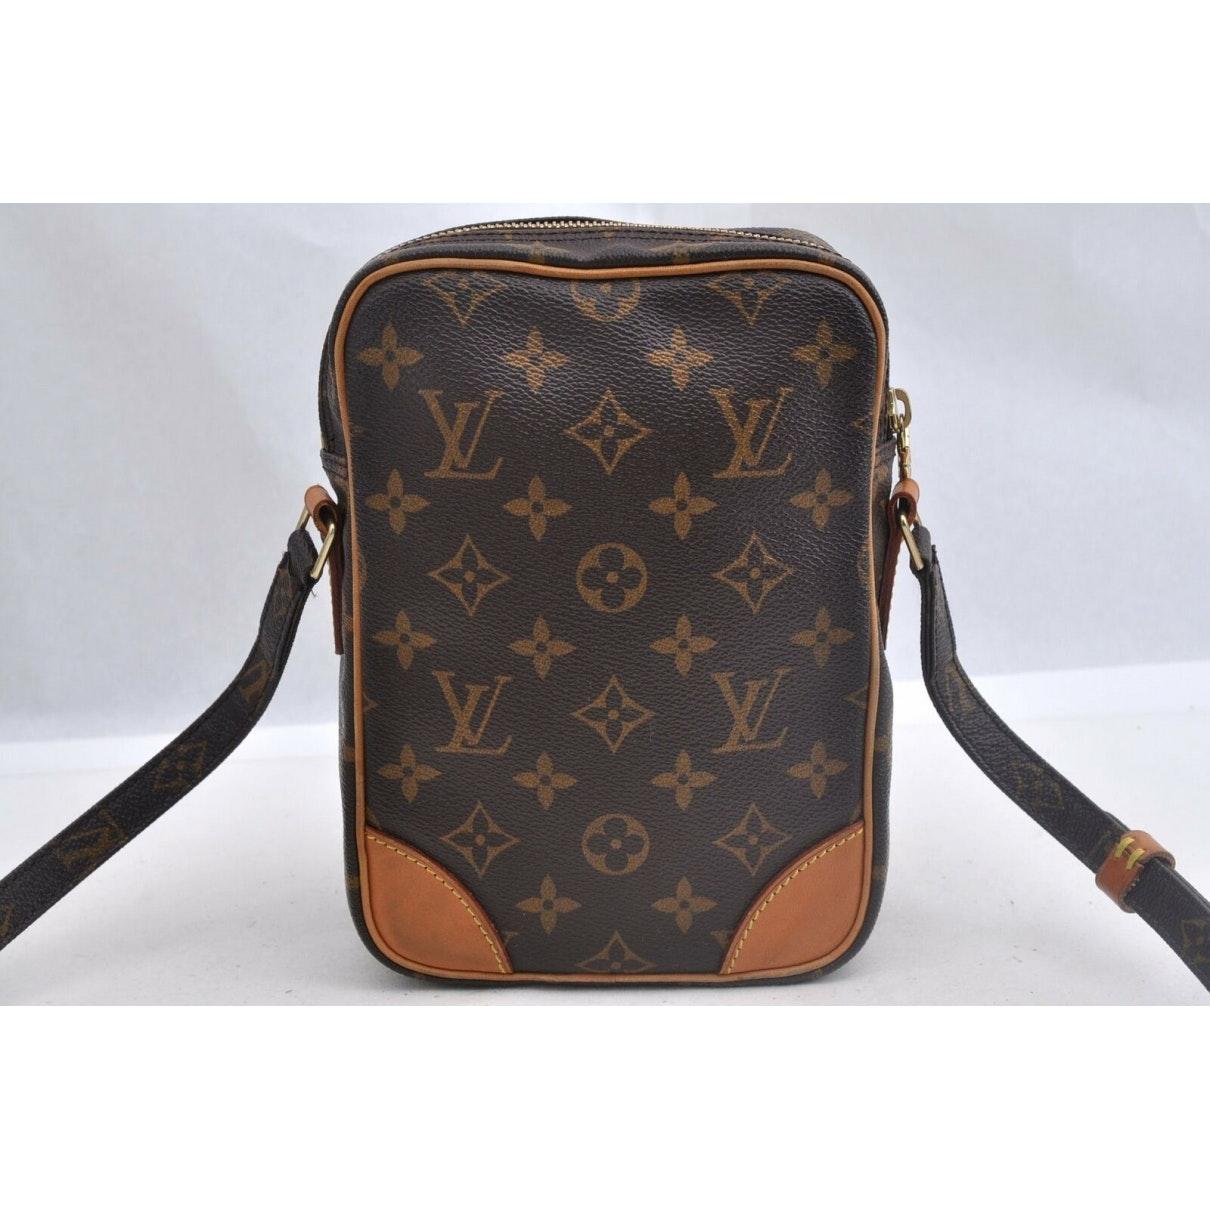 Louis Vuitton Amazon Brown Cloth in Brown - Lyst